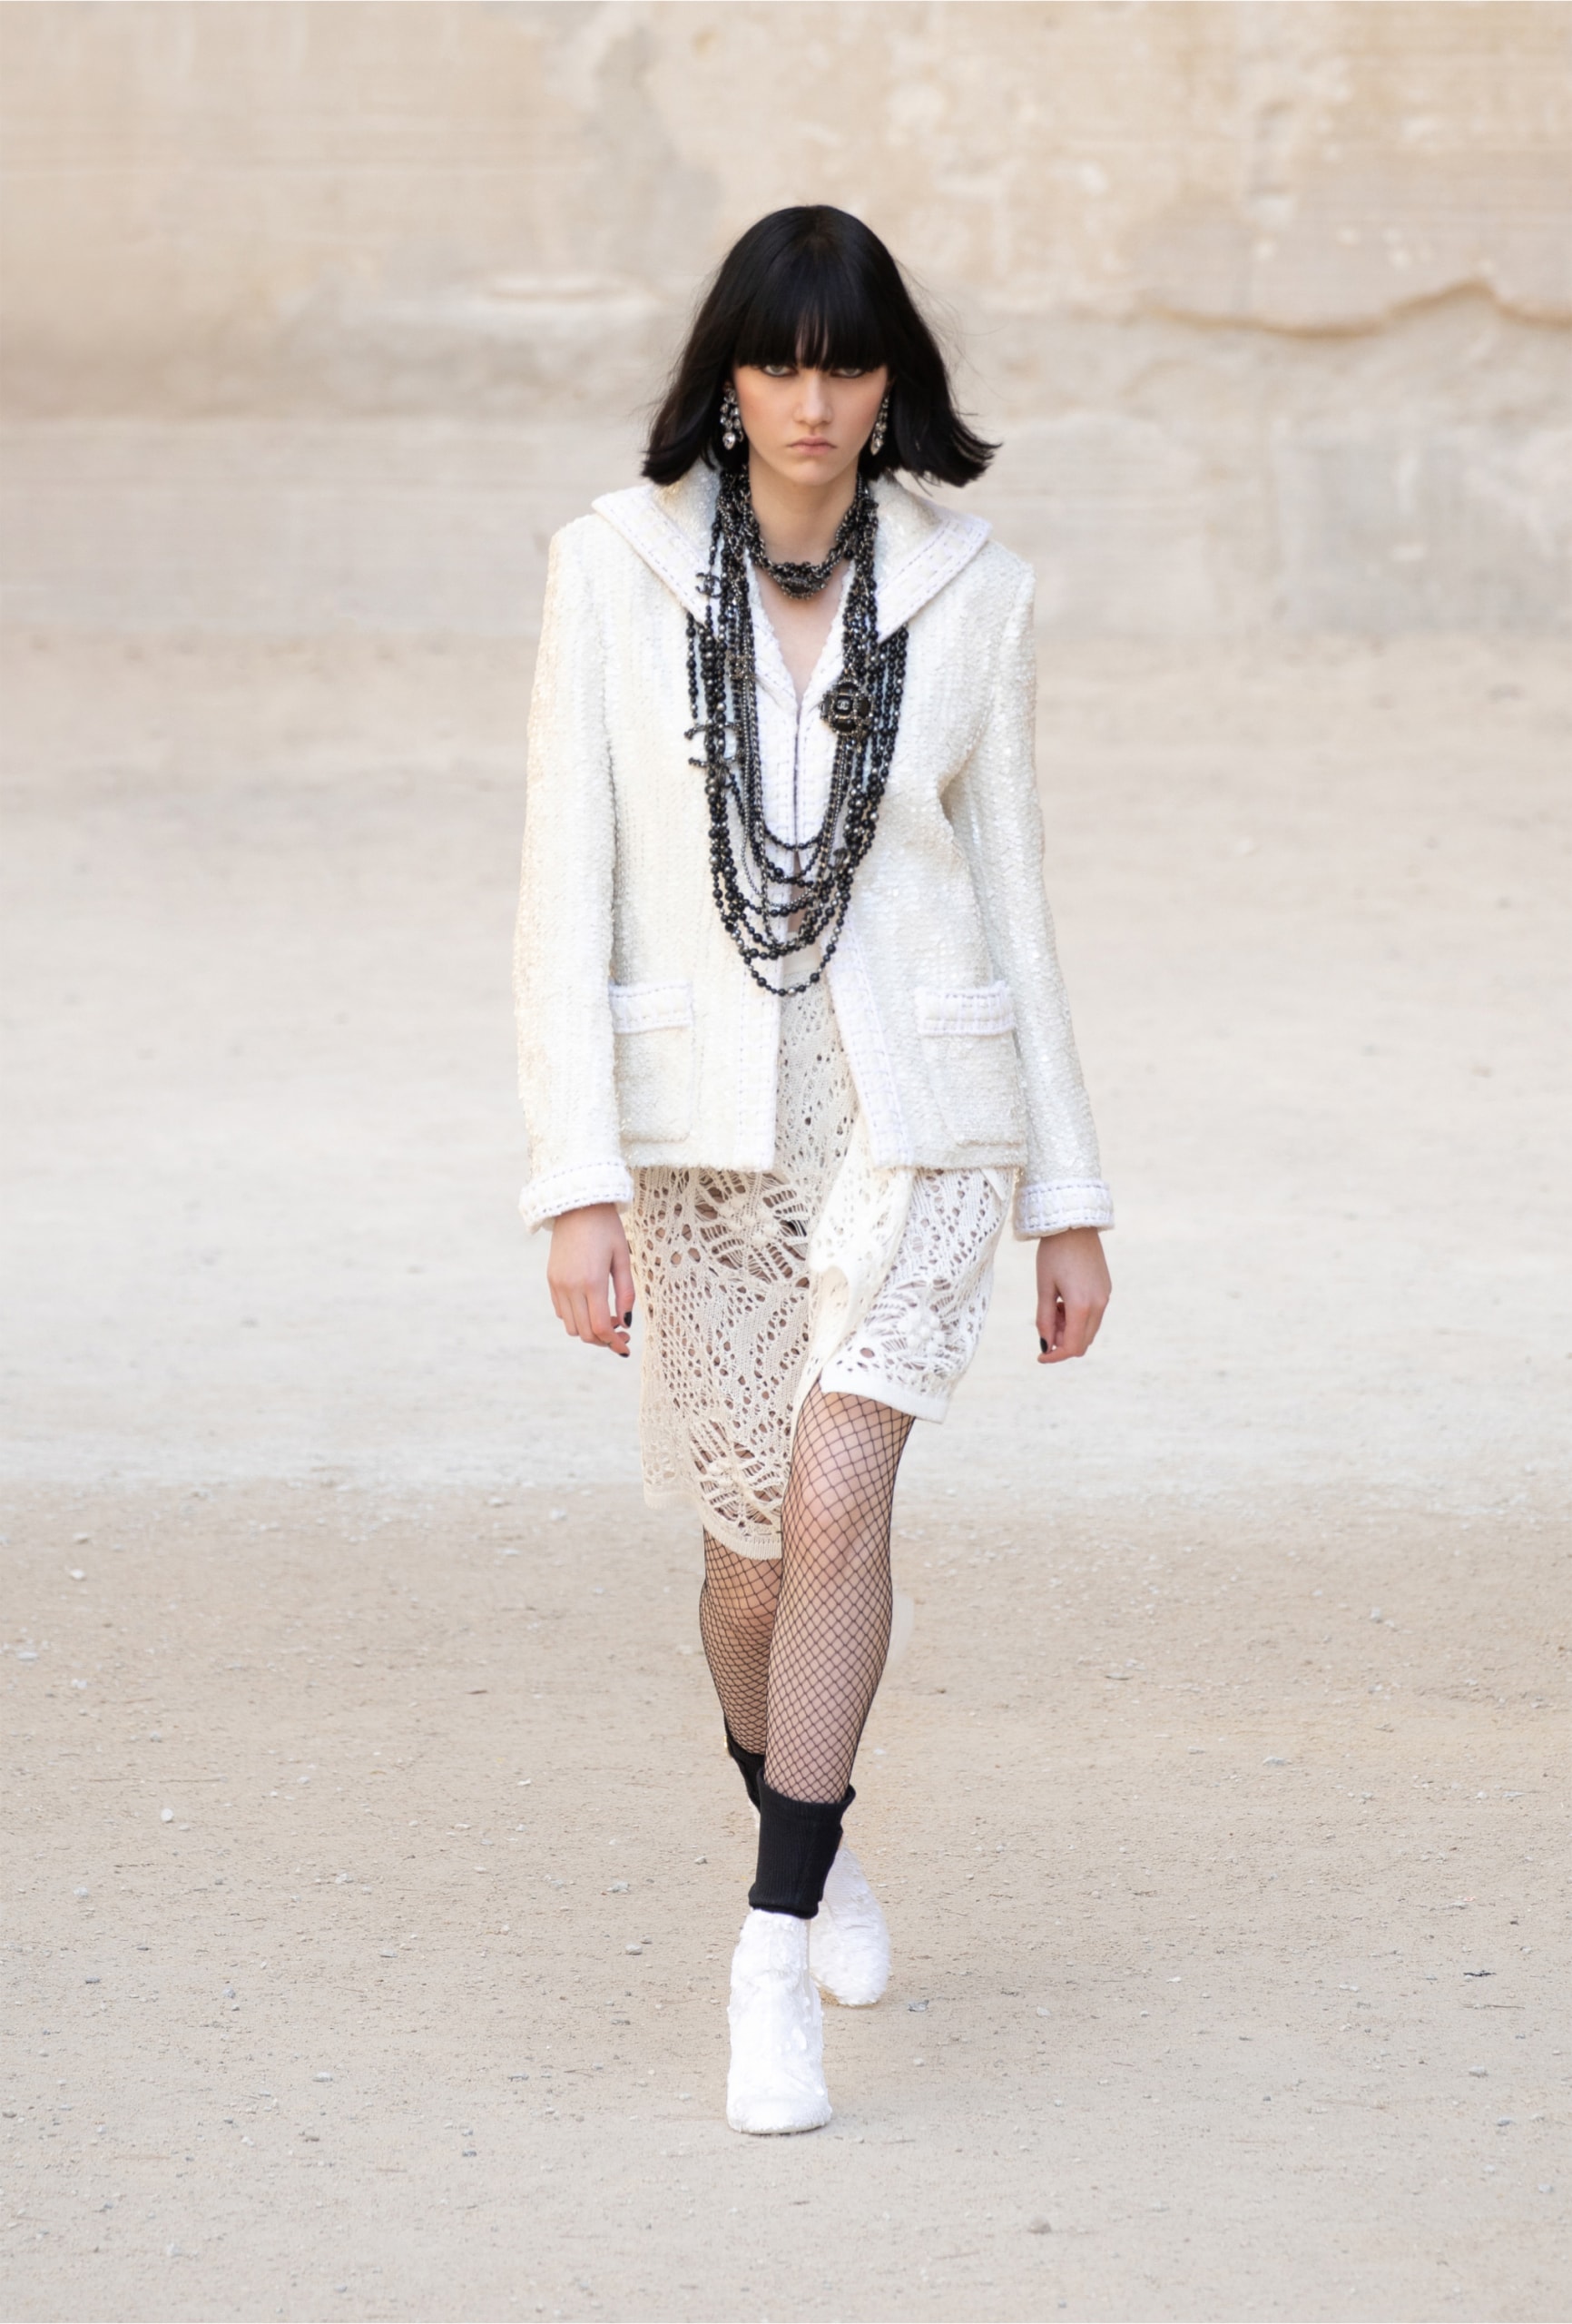 Chanel Resort 2018 collection, runway looks, beauty, models, and